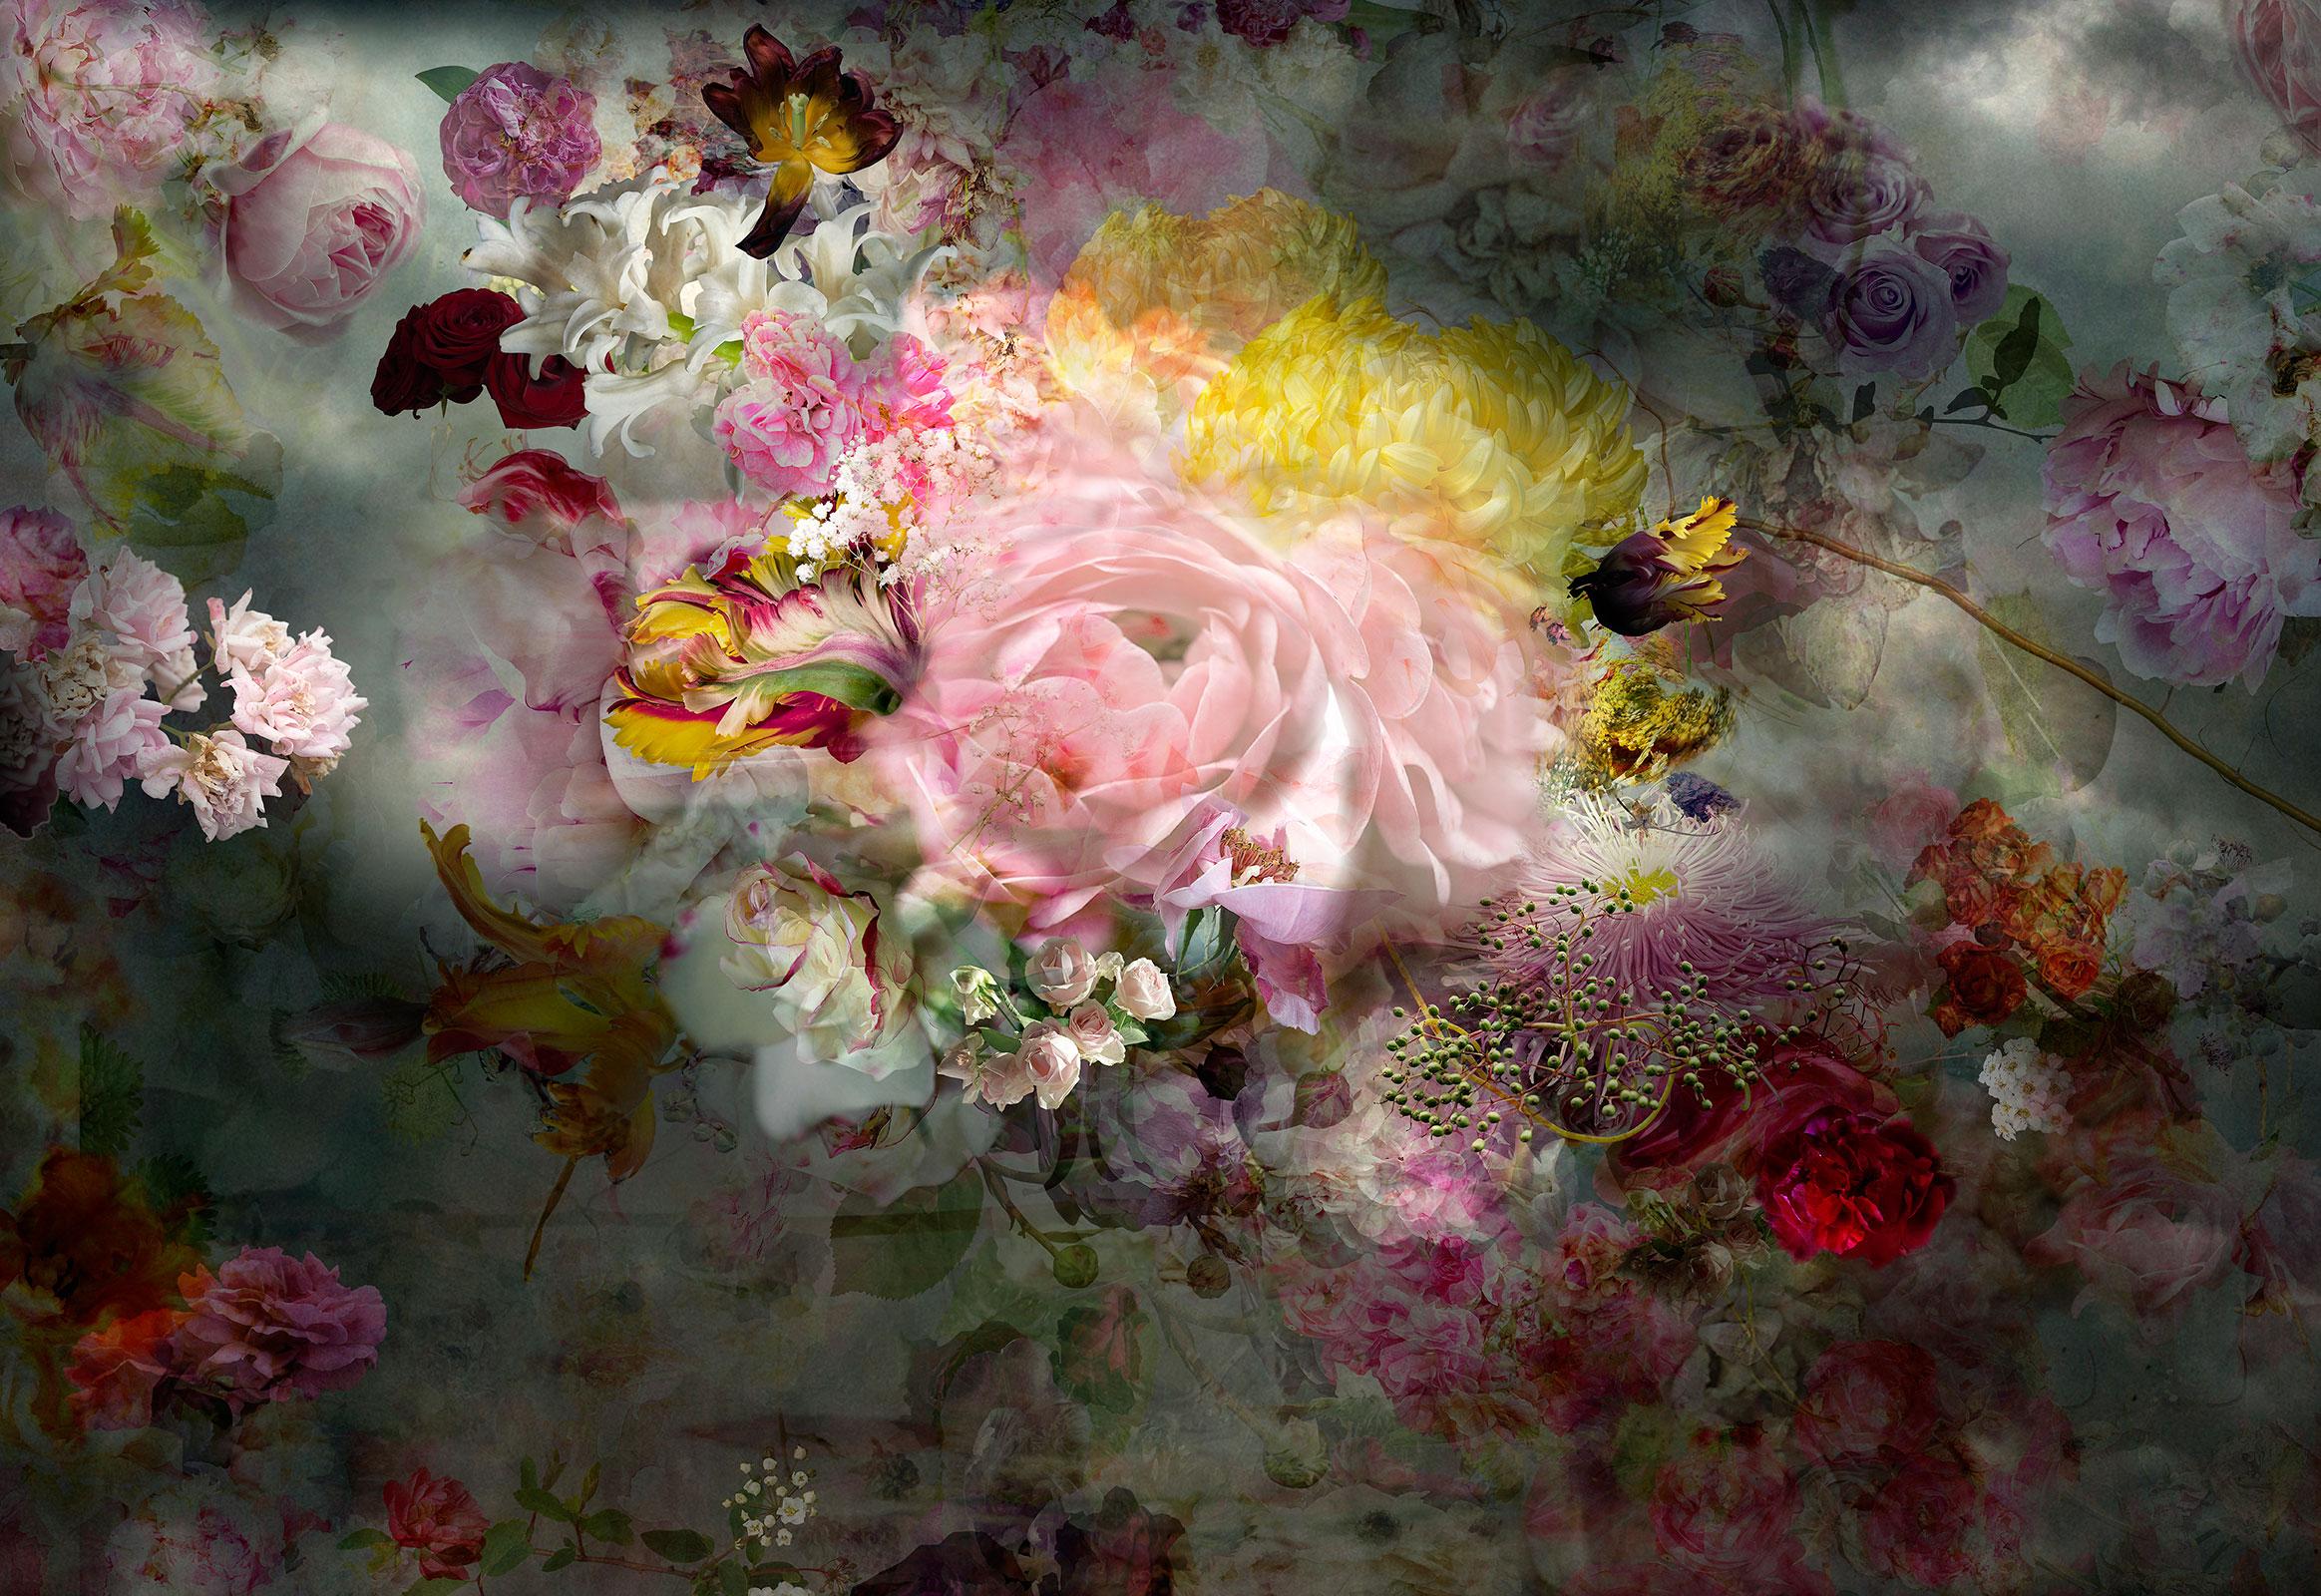 Isabelle Menin Still-Life Photograph - Solstice #10 - Floral still life abstract landscape contemporary photograph